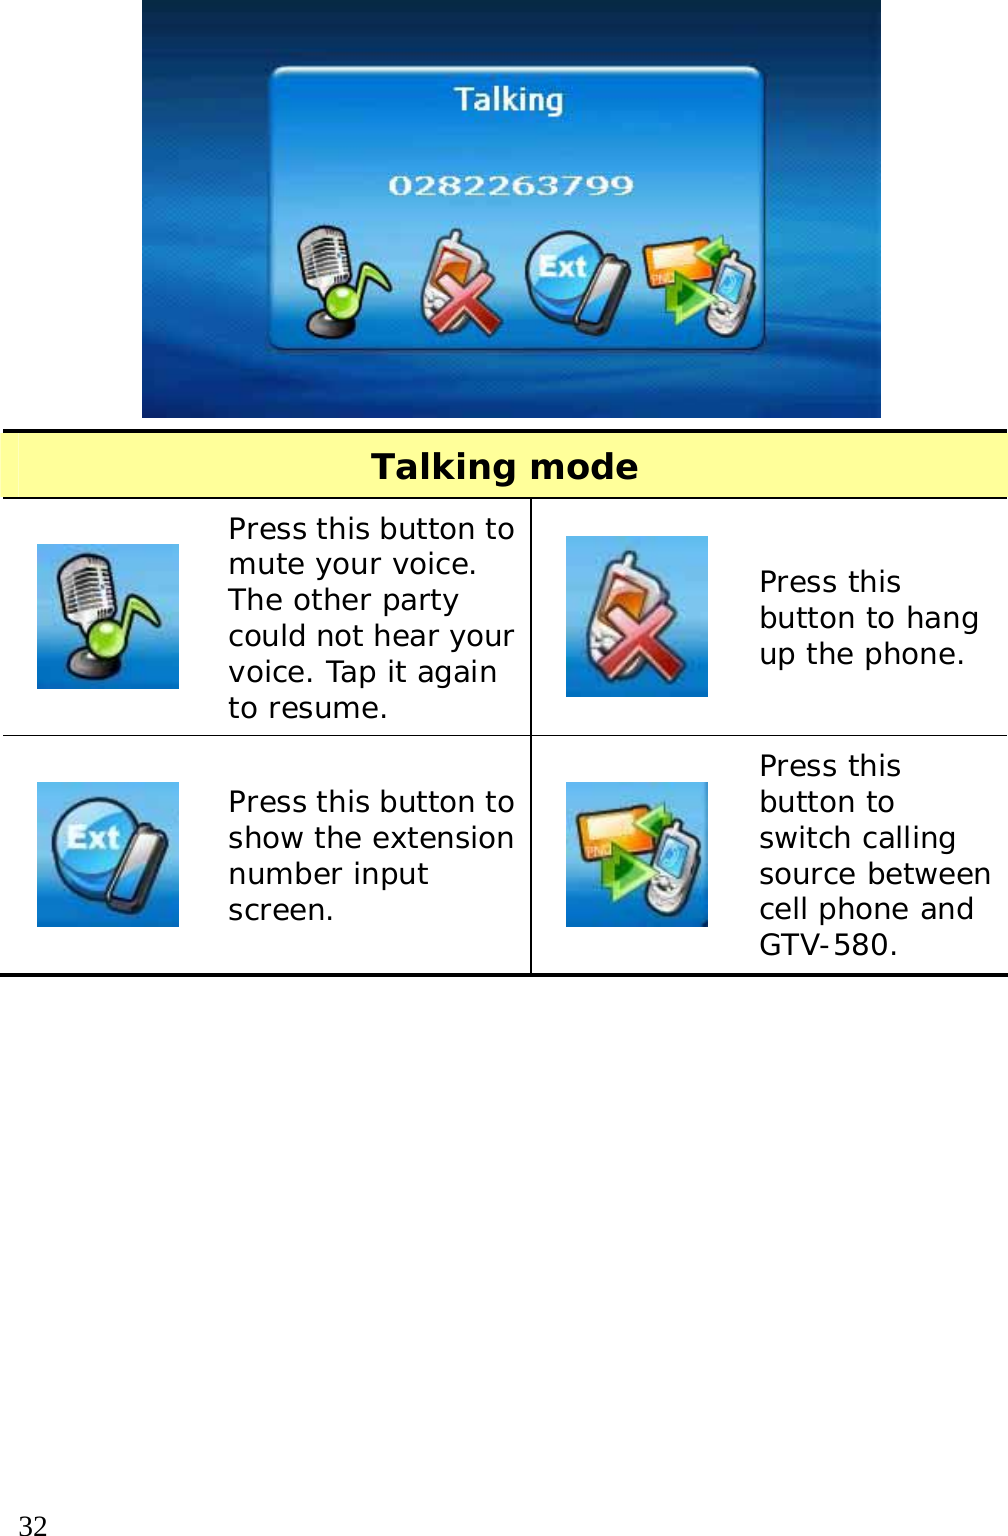  32   Talking mode  Press this button to mute your voice. The other party could not hear your voice. Tap it again to resume.   Press this button to hang up the phone.  Press this button to show the extension number input screen.   Press this button to switch calling source between cell phone and GTV-580.   